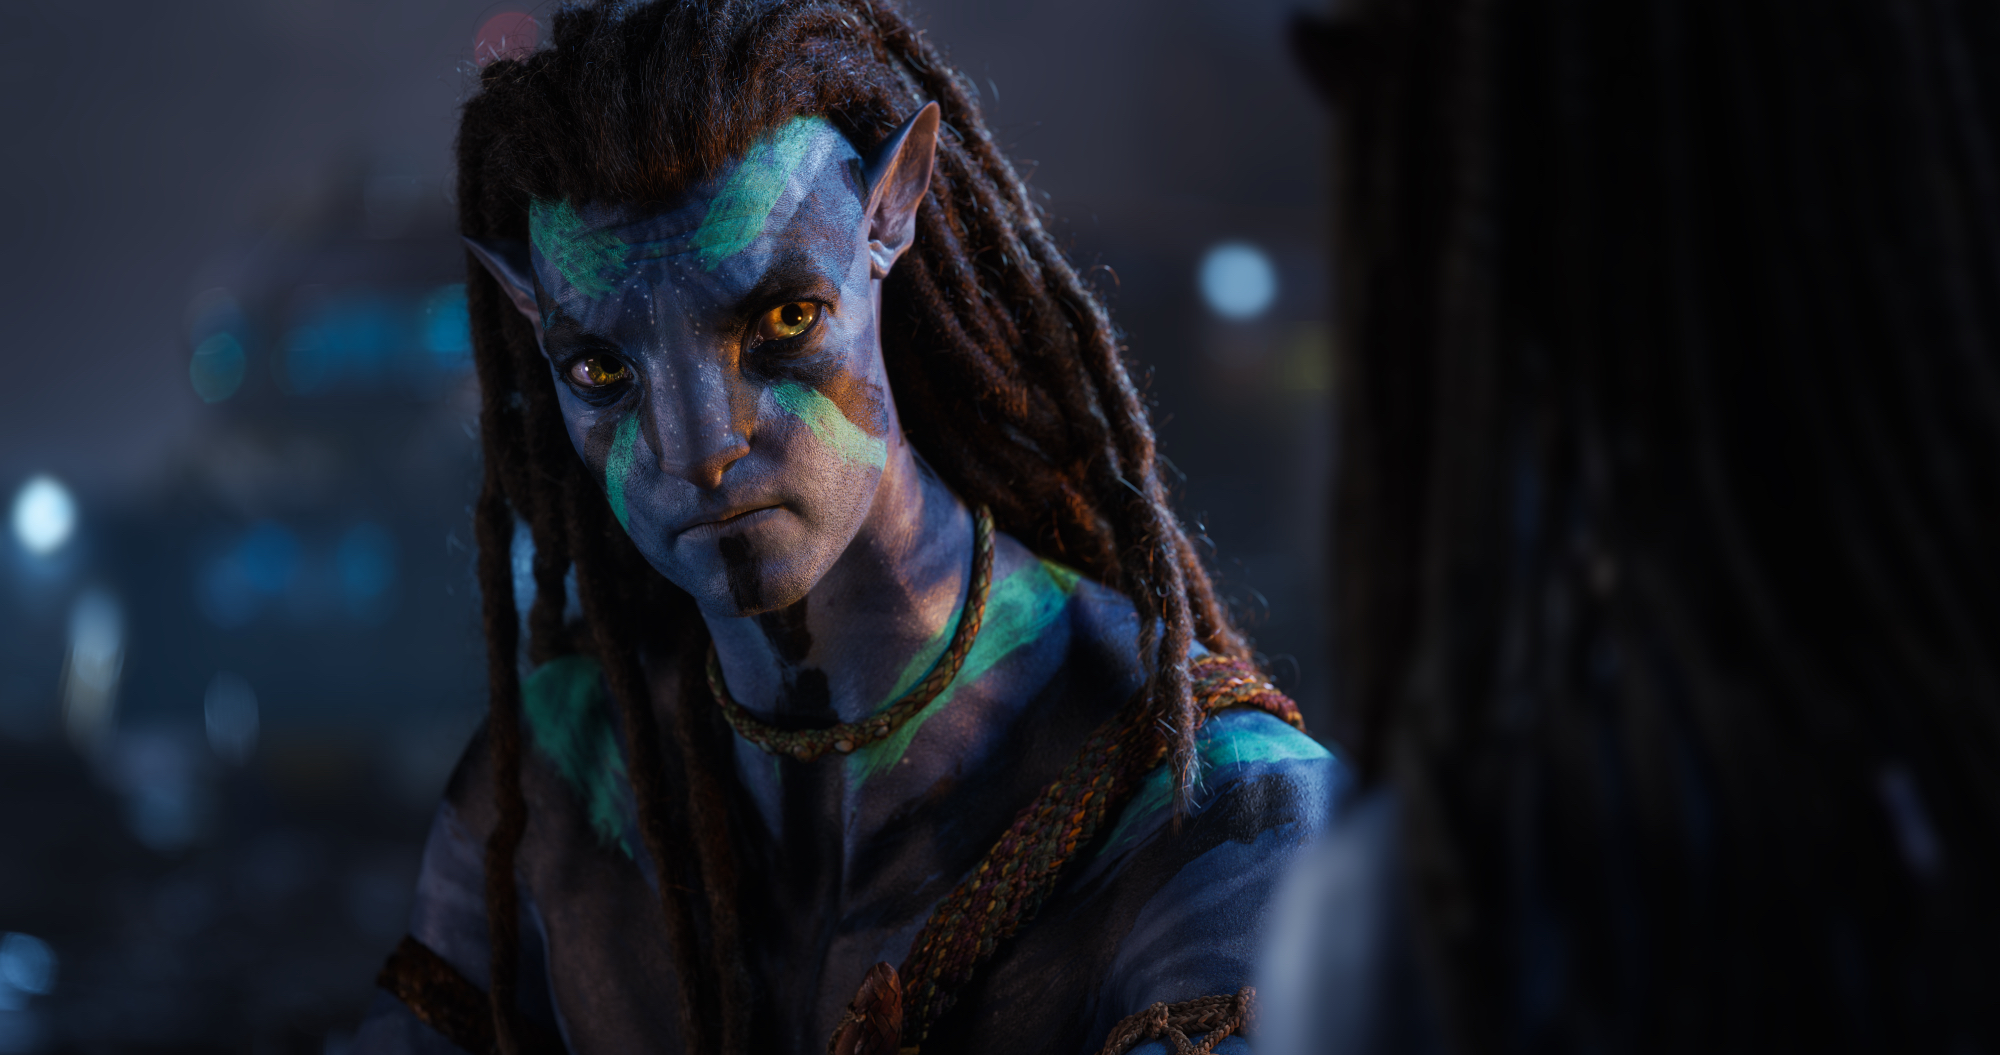 'Avatar: The Way of Water' Jake Sully (Sam Worthington) looks straight ahead with turquoise war paint on his face and body